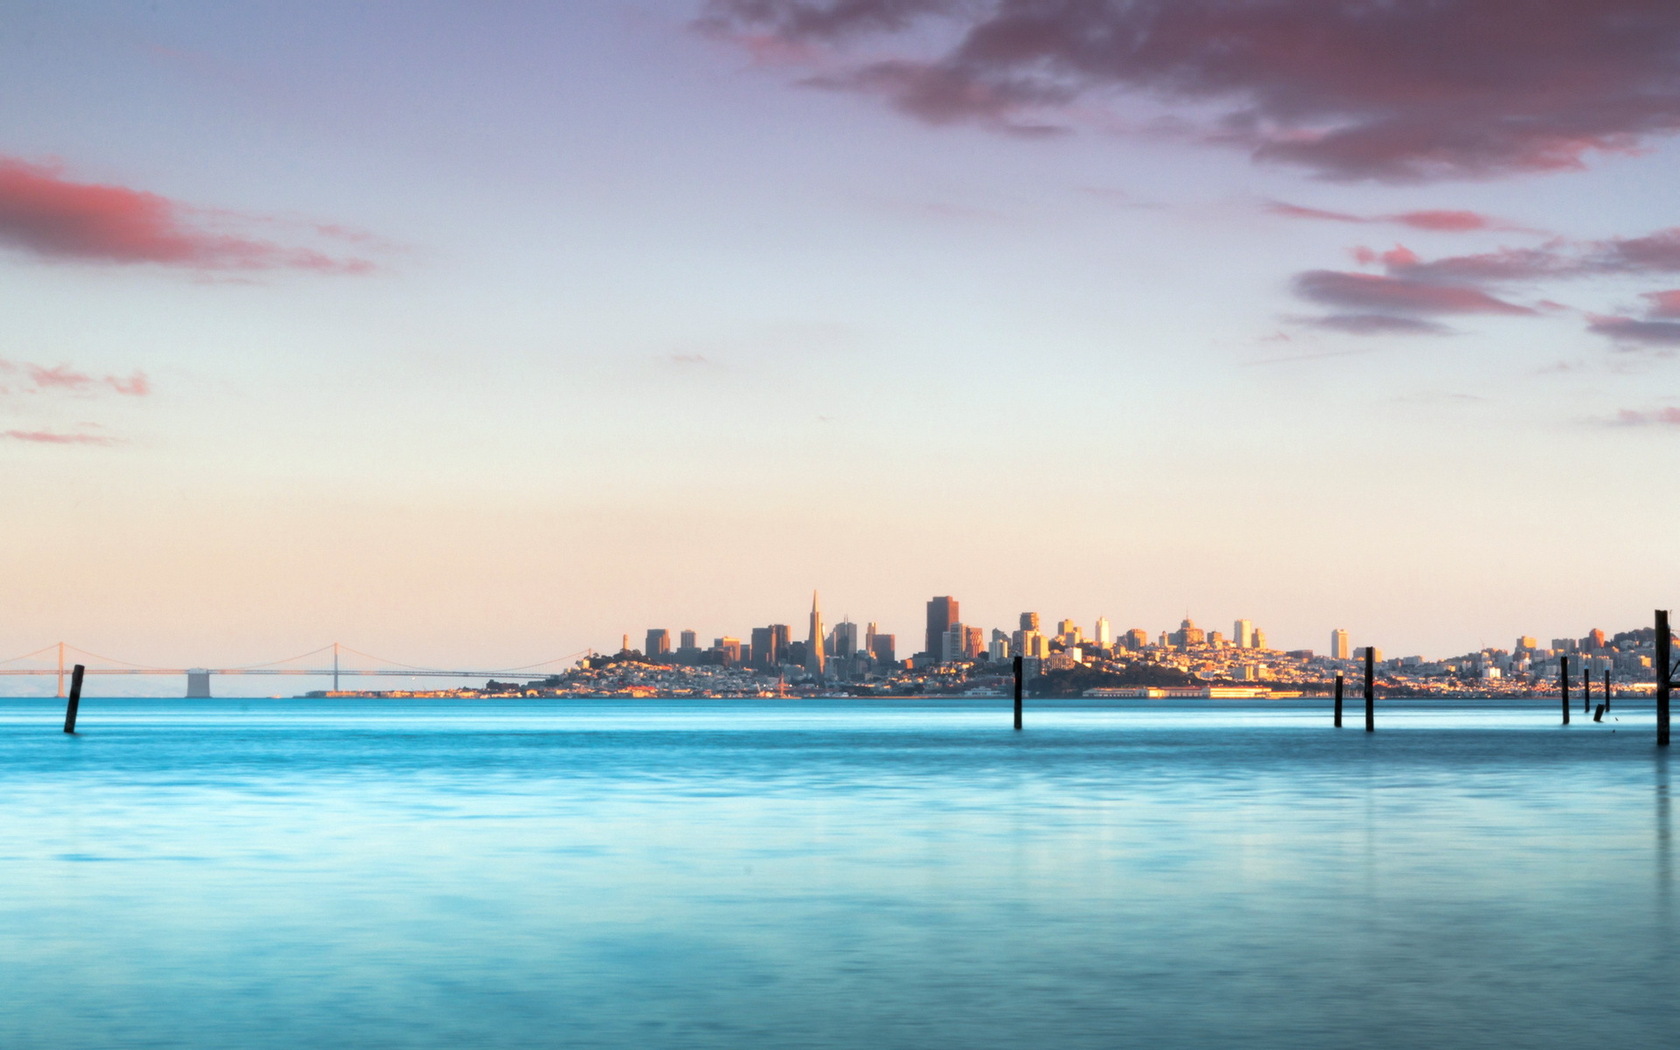 Beautiful Mac Images Free Download By Maurice Mounsey - Marina, View Of San Francisco - HD Wallpaper 